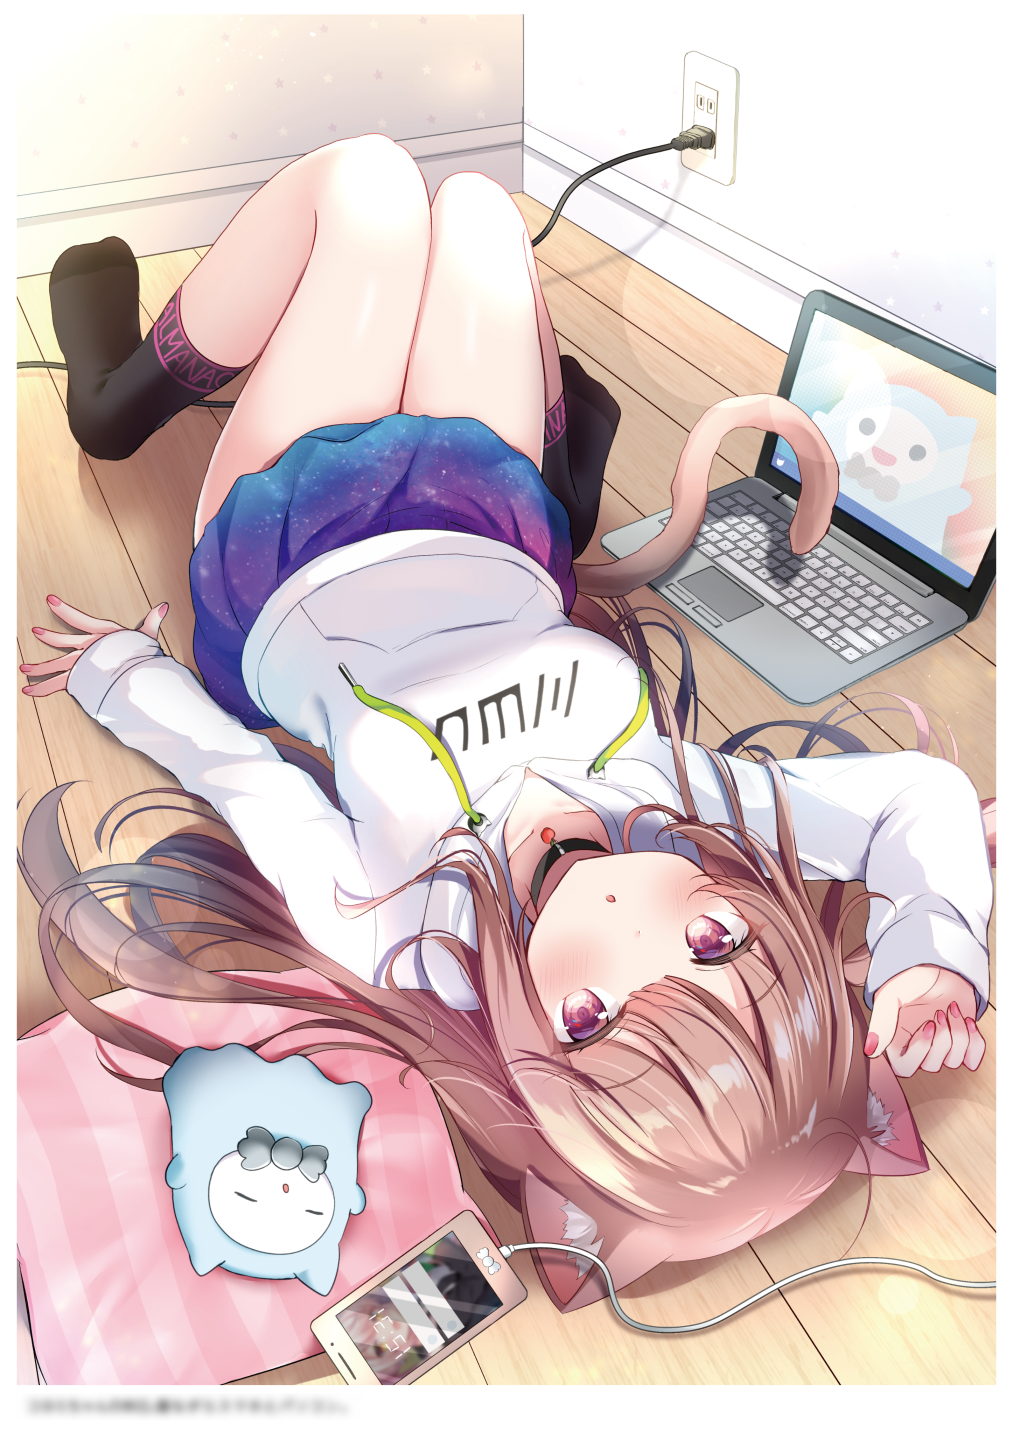 1girl :o brown_hair cable cat_ears cat_girl cat_tail charger charging doll indoors jacket laptop laying long_hair looking_at_viewer looking_up nail_polish original original_character phone pillow red_eyes shorts socks tail thighs valentine white_shirt wooden_floor